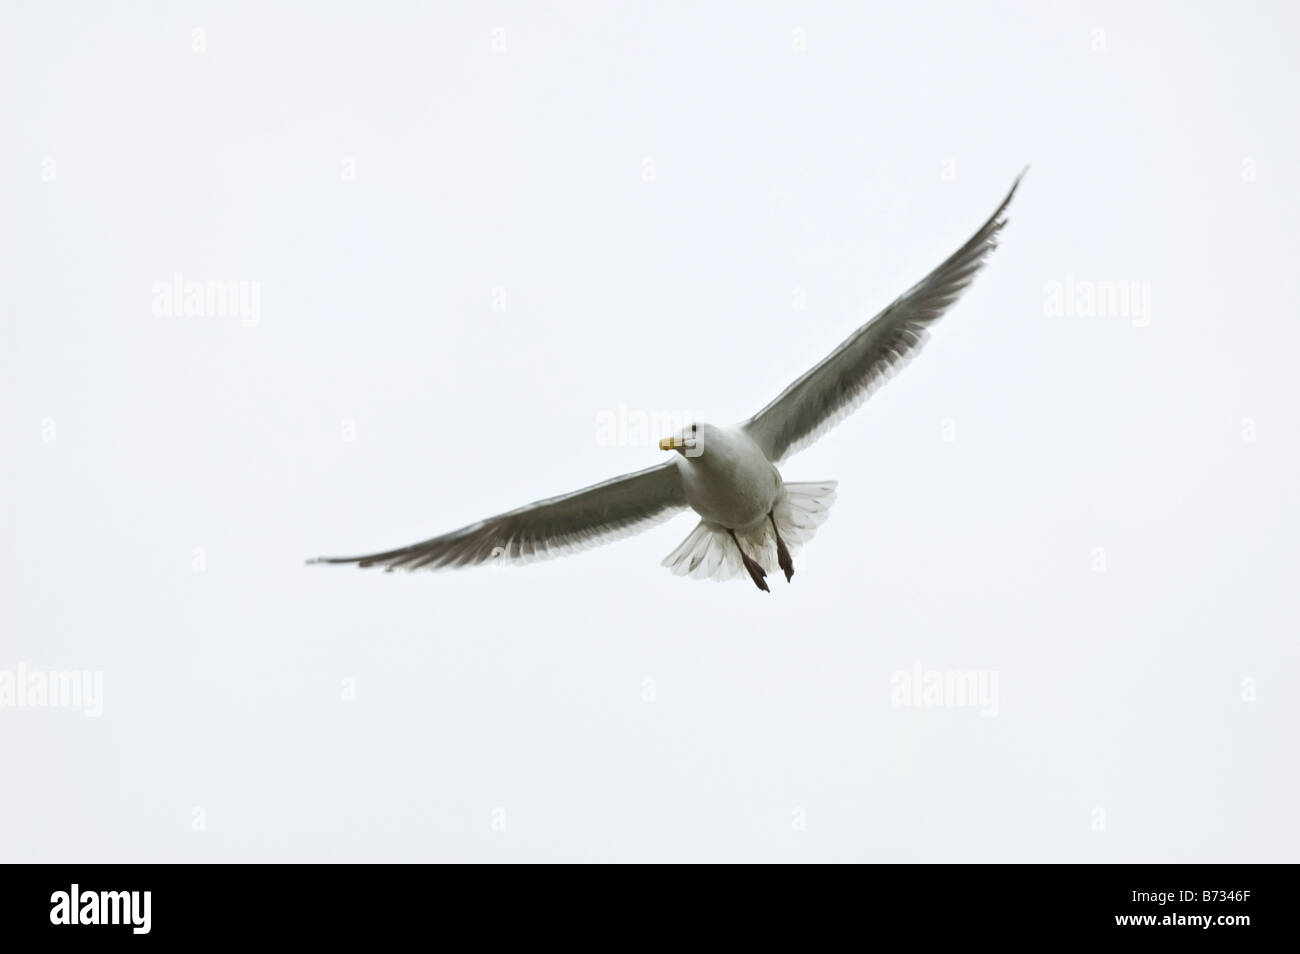 A white seagull gliding on a foggy day. Stock Photo